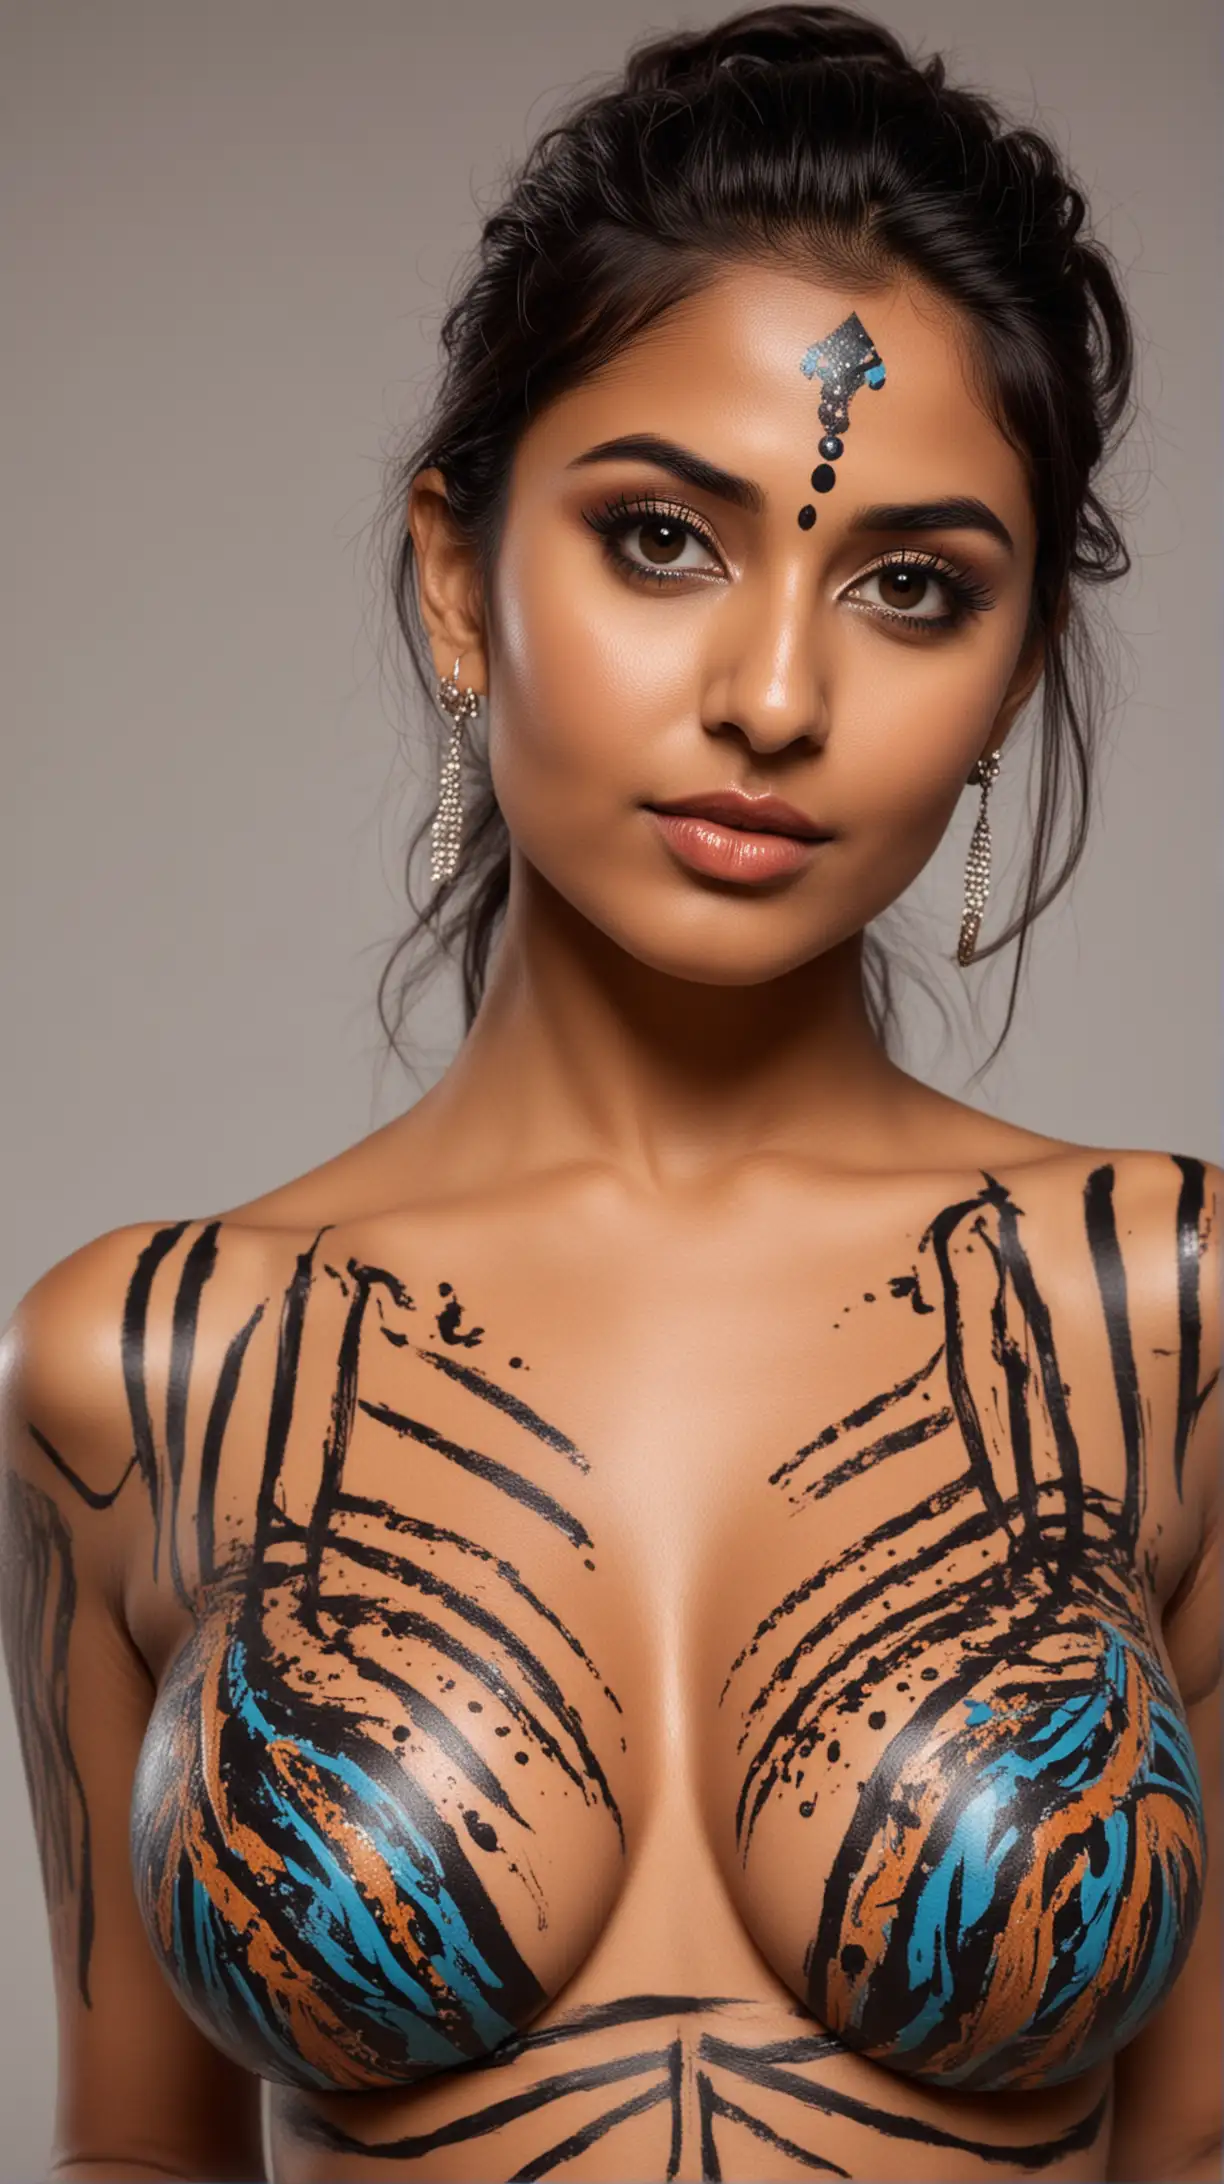 Pretty 24 year old Indian woman with cleavage and a body paint at a photoshoot. Posing. Closeup. 
